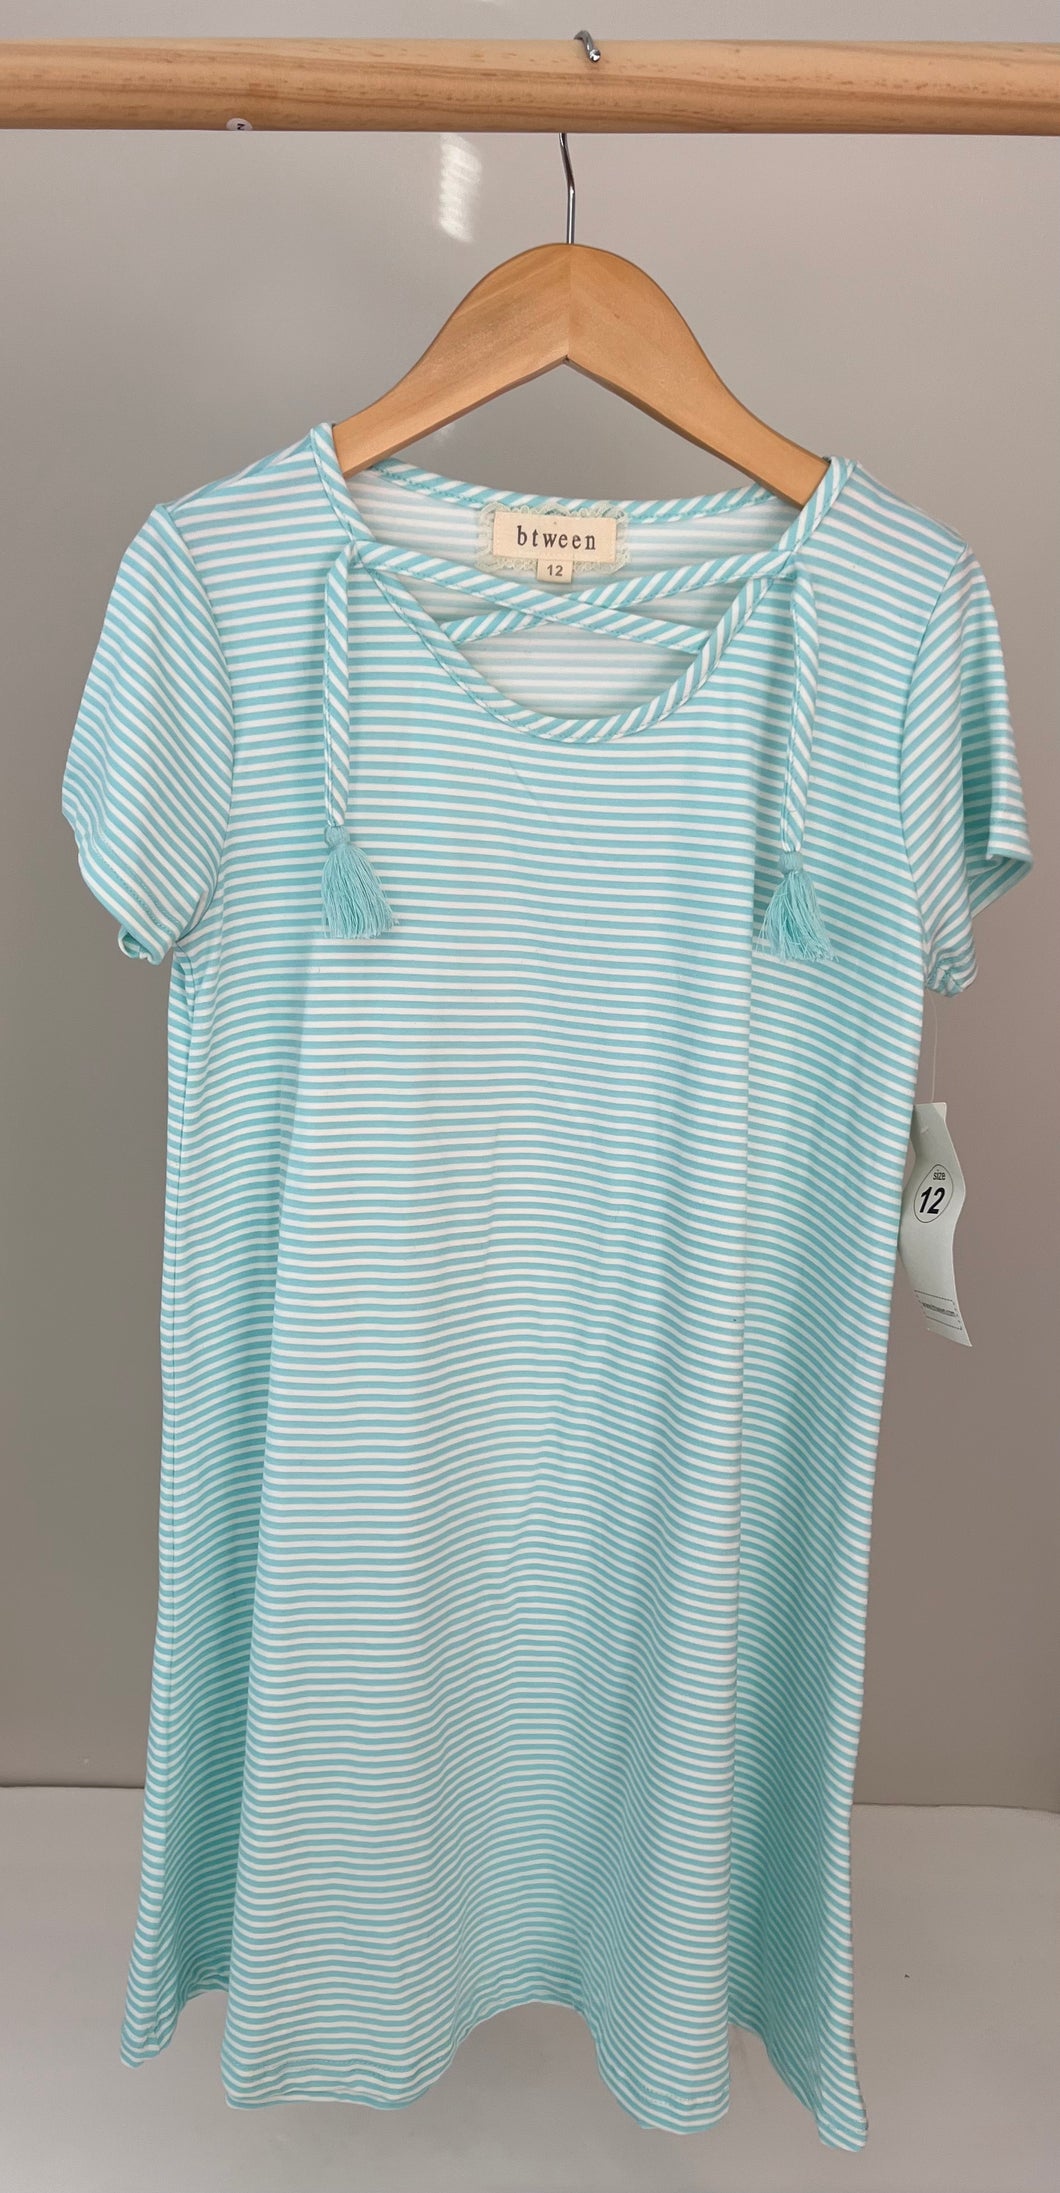 *With Tags* Striped Dress Size 12